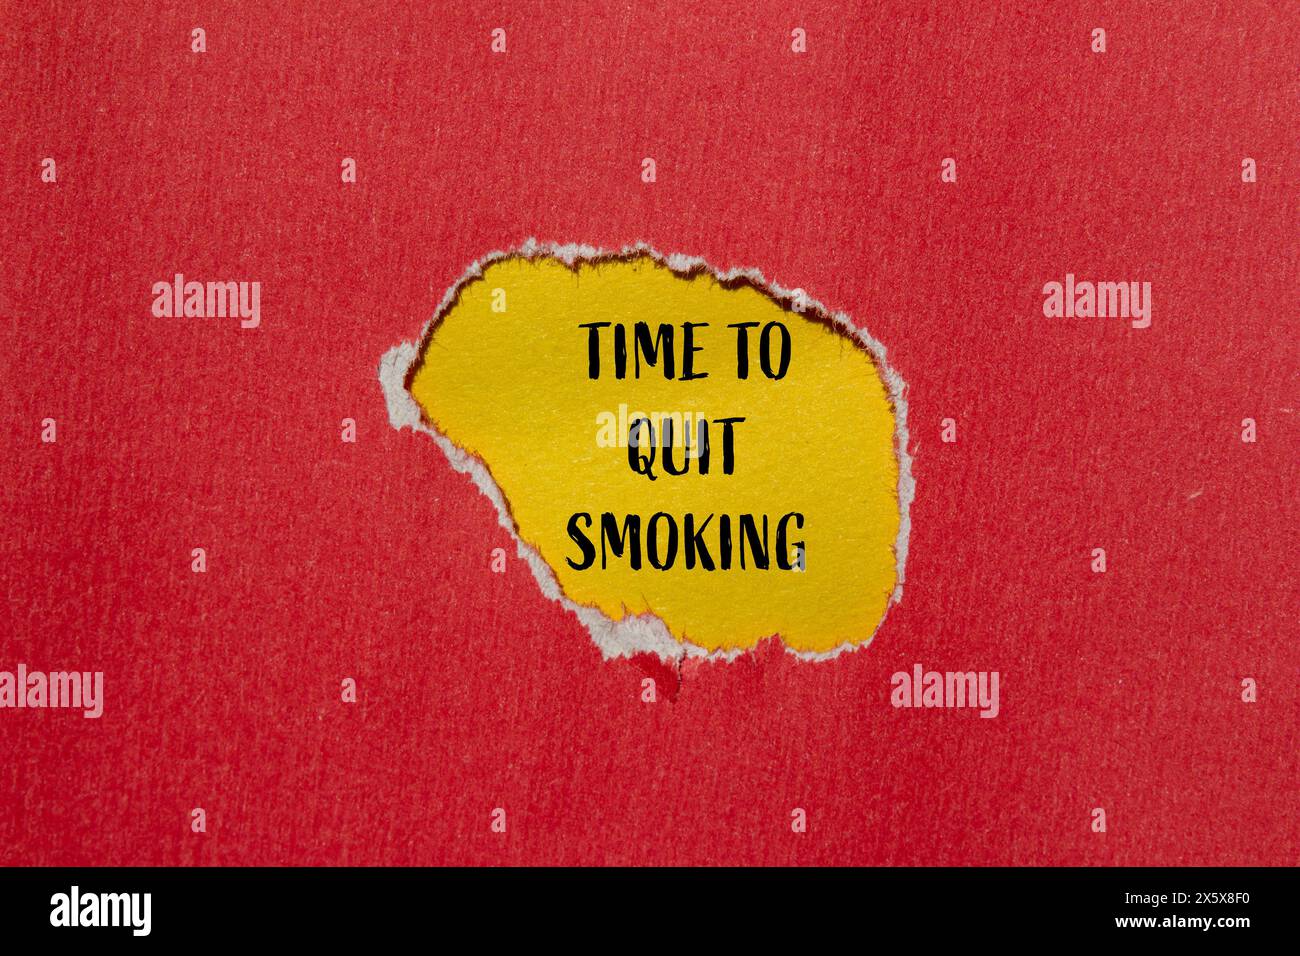 Time to quit smoking words written on ripped red paper with yellow background. Conceptual time to quit smoking symbol. Copy space. Stock Photo